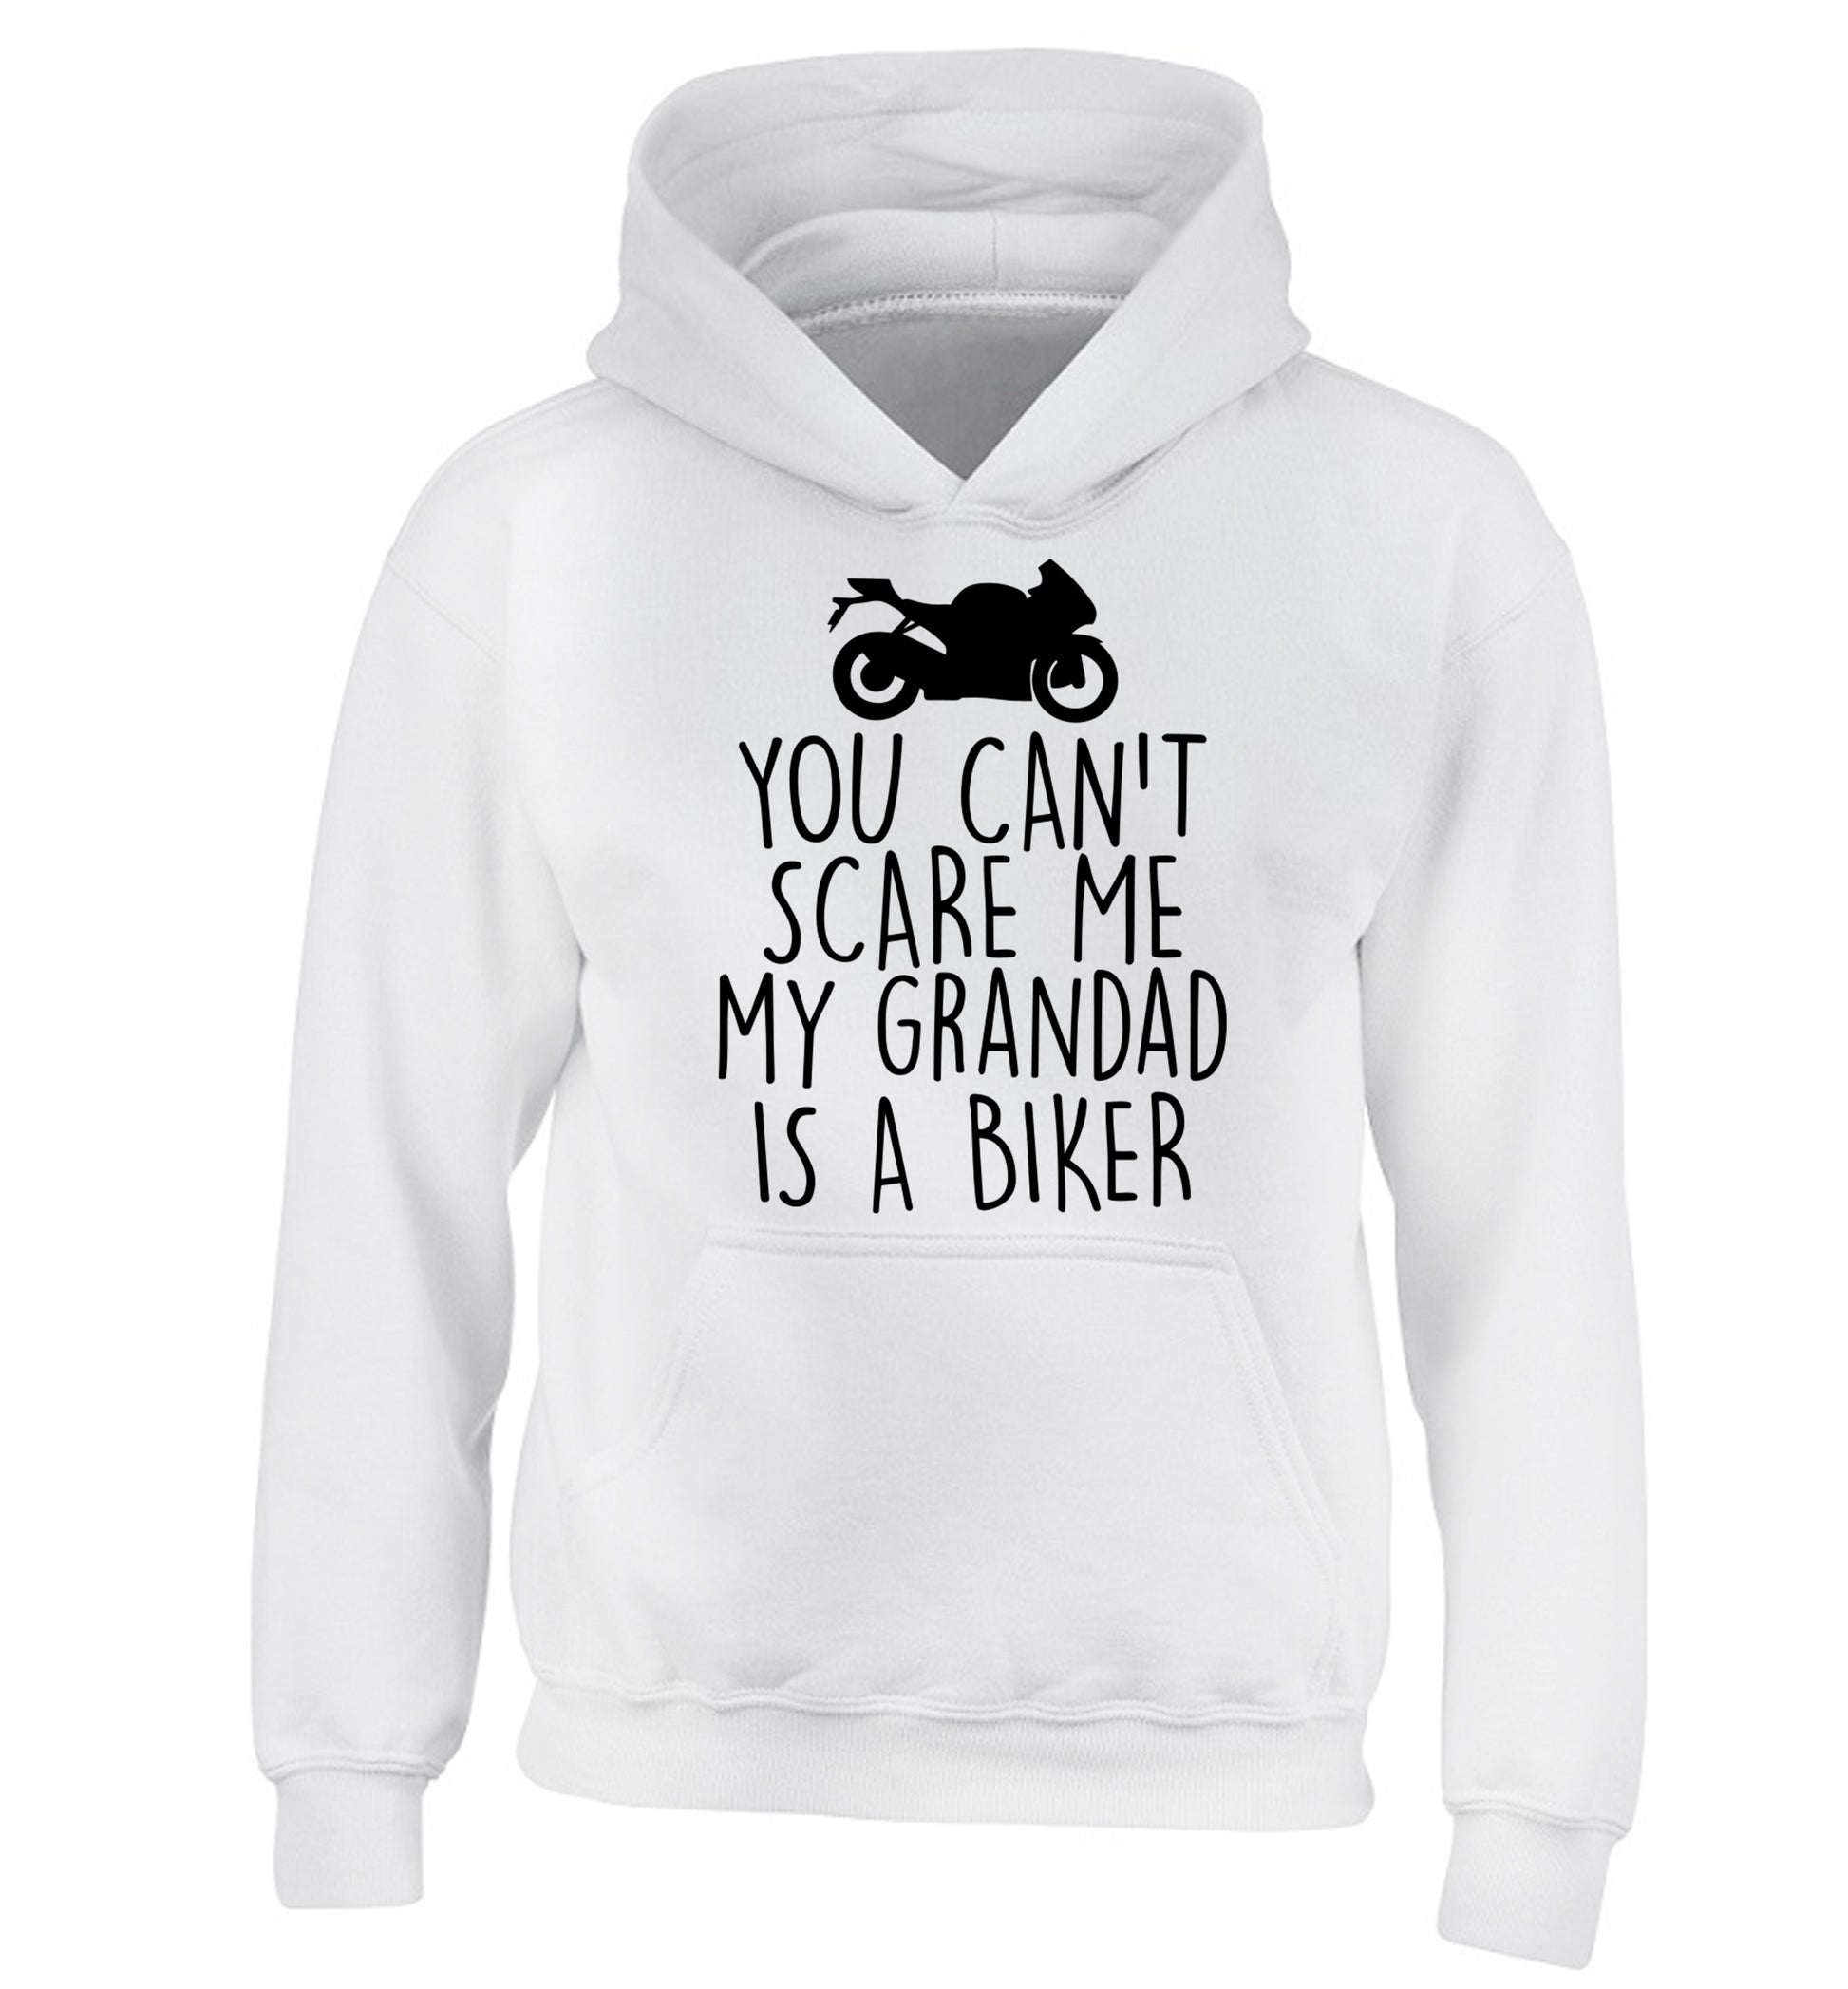 You can't scare me my grandad is a biker children's white hoodie 12-13 Years